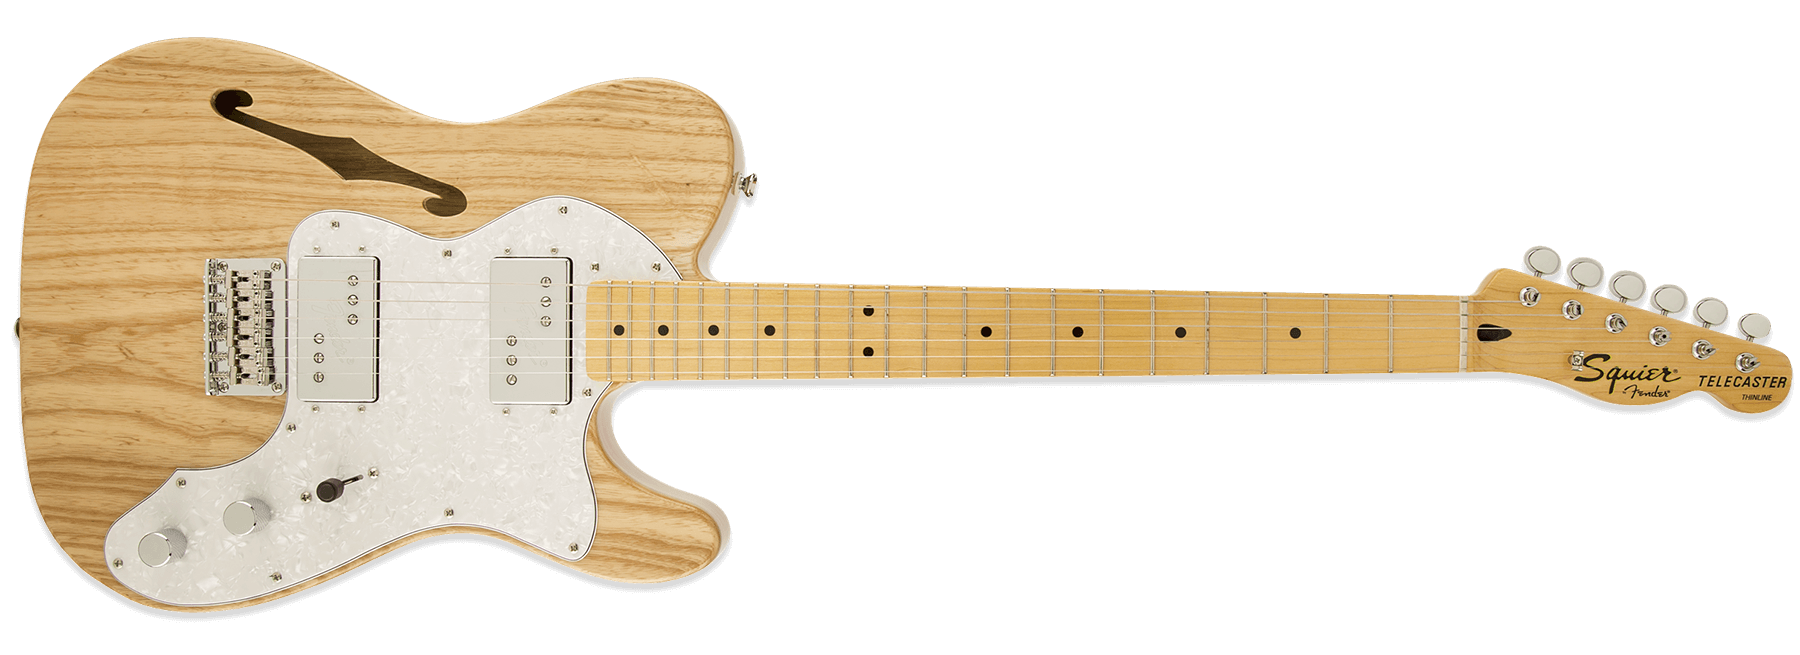 Squier Vintage Modified ’72 Telecaster Thinline